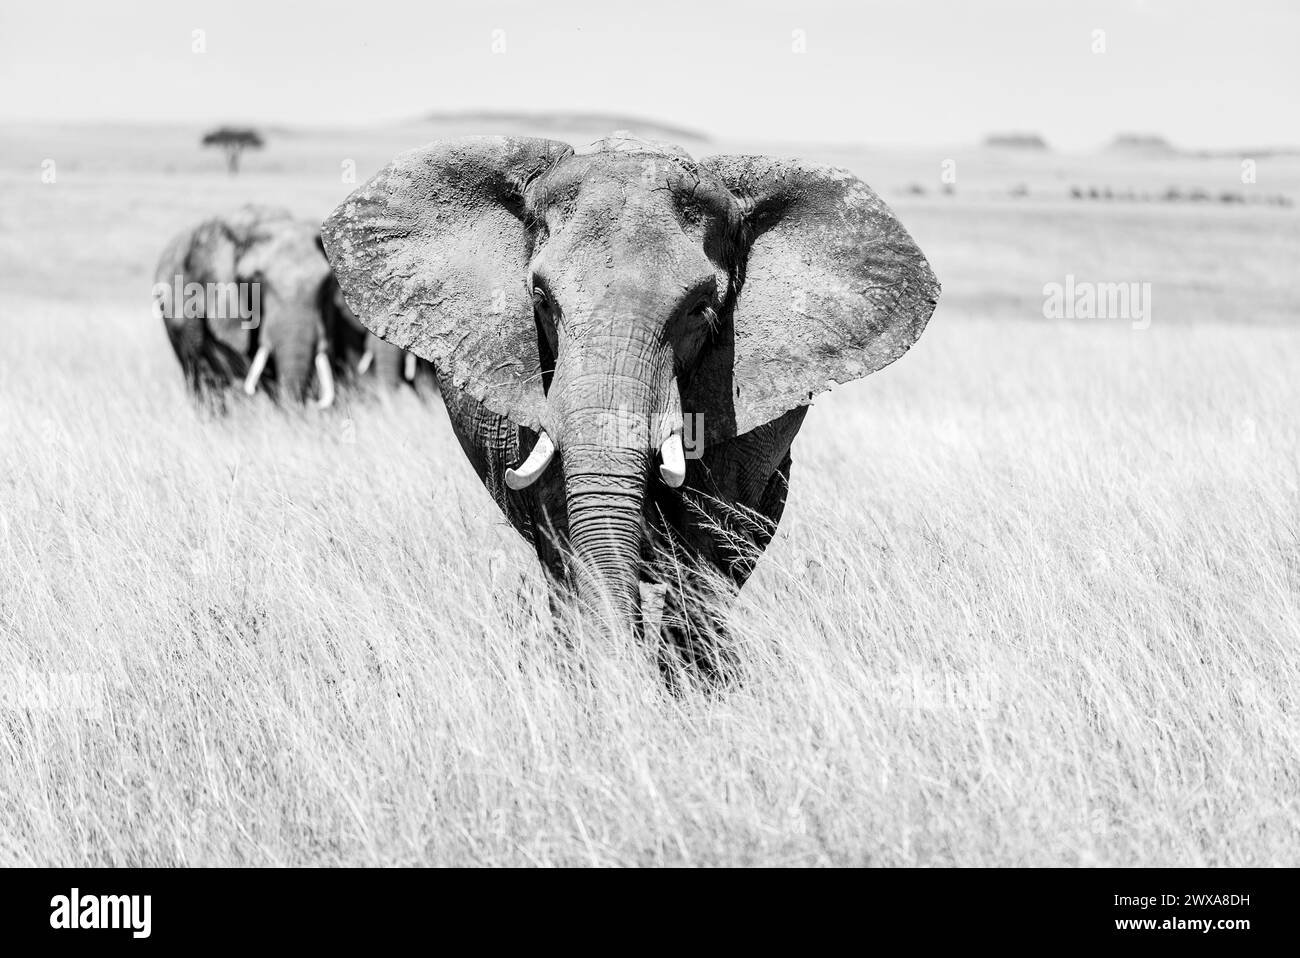 Elephants in the kenyan environment in the wonderful amboseli national reserve Stock Photo